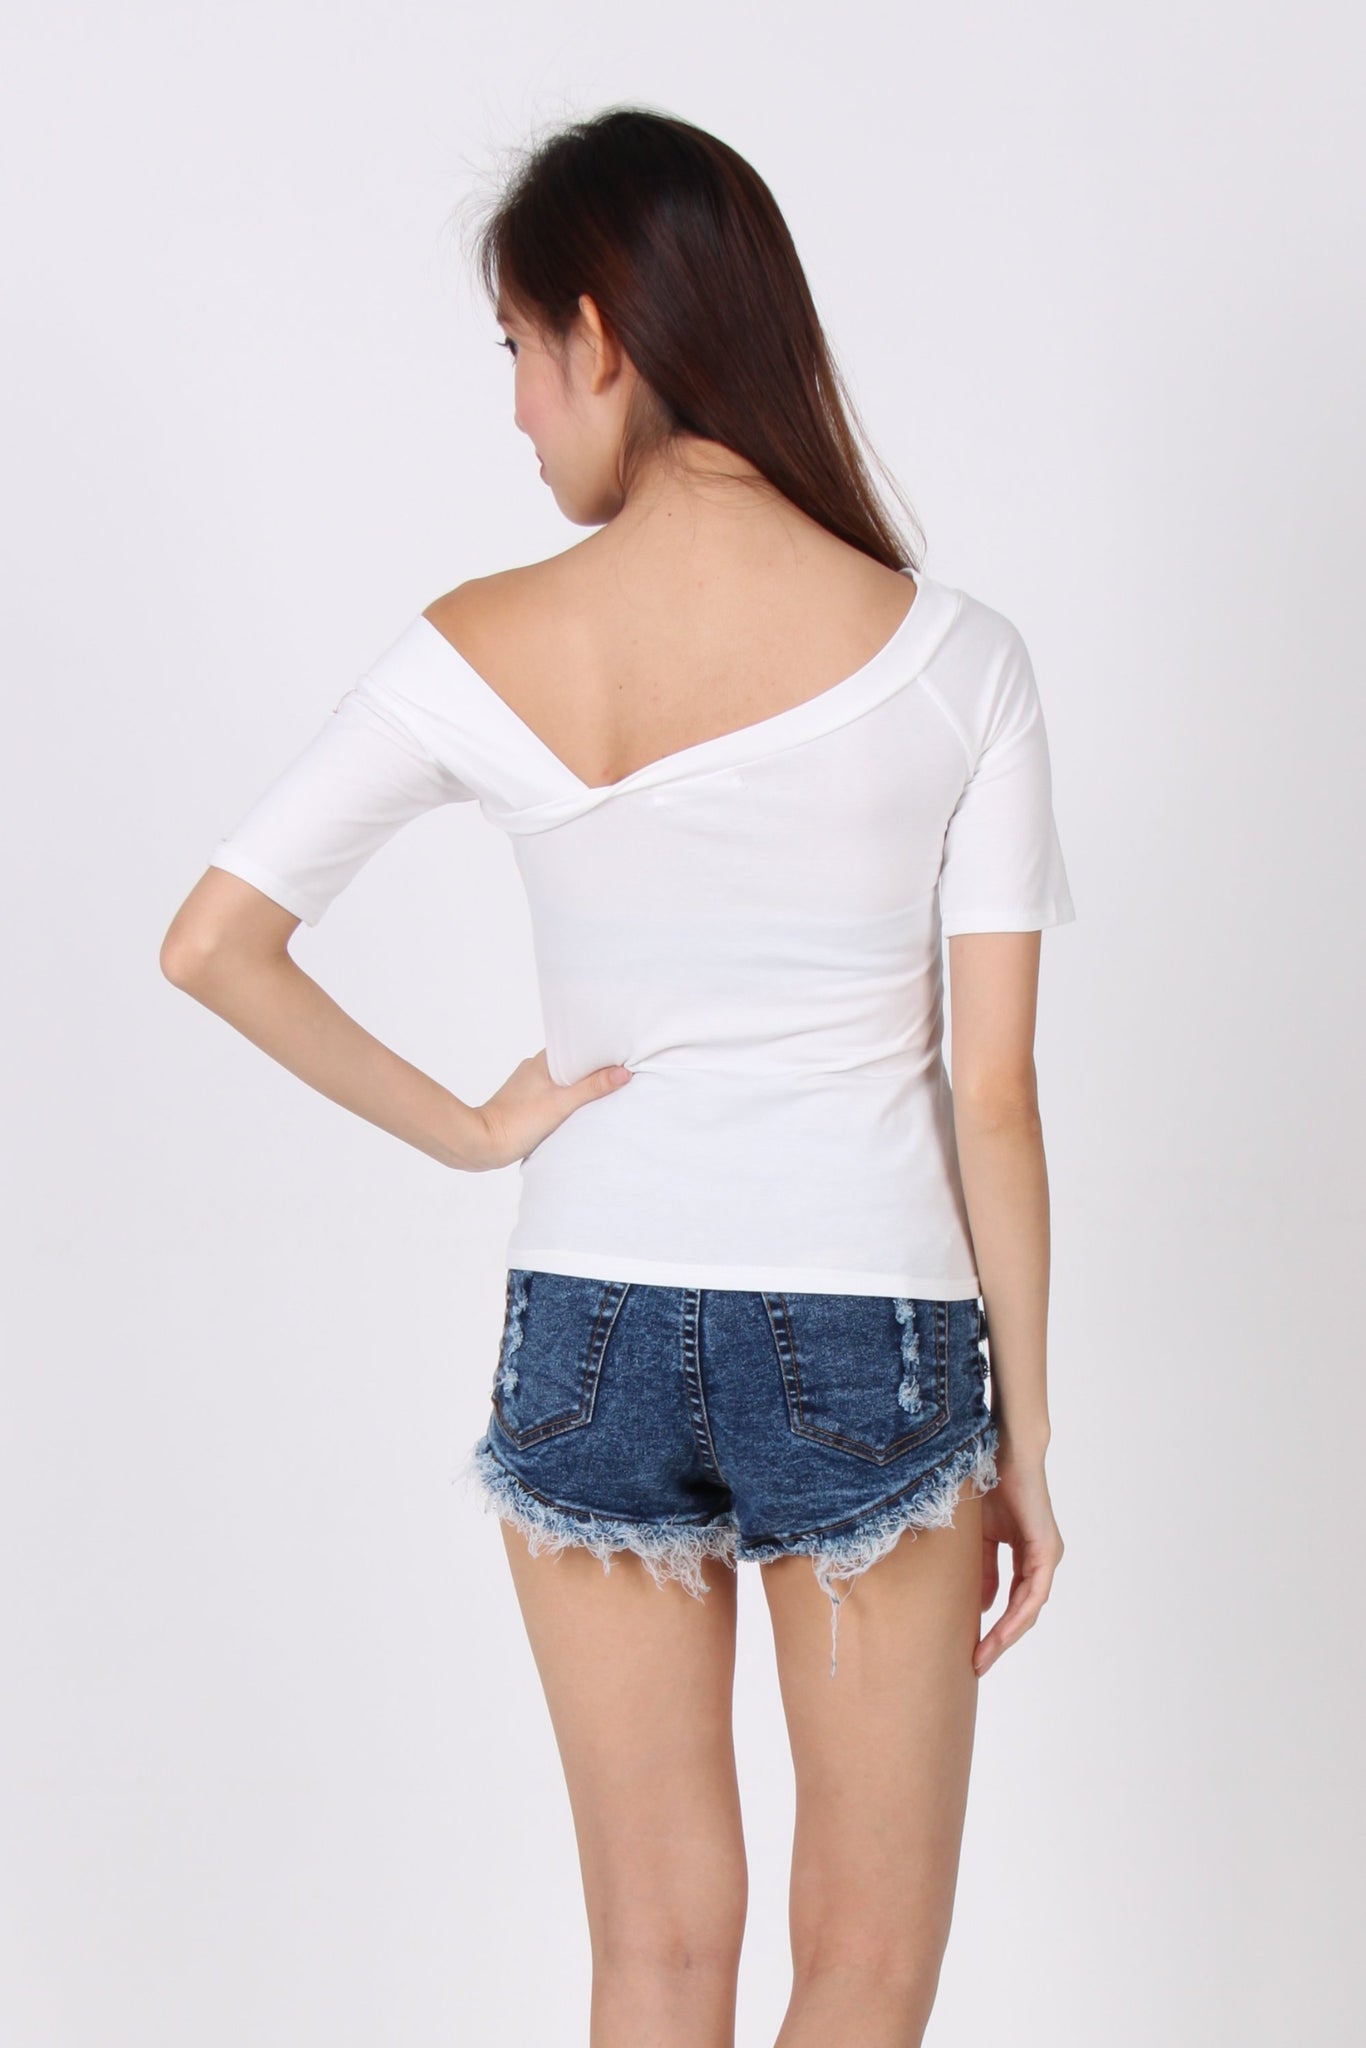 Toga Sleeve Cotton Top in White